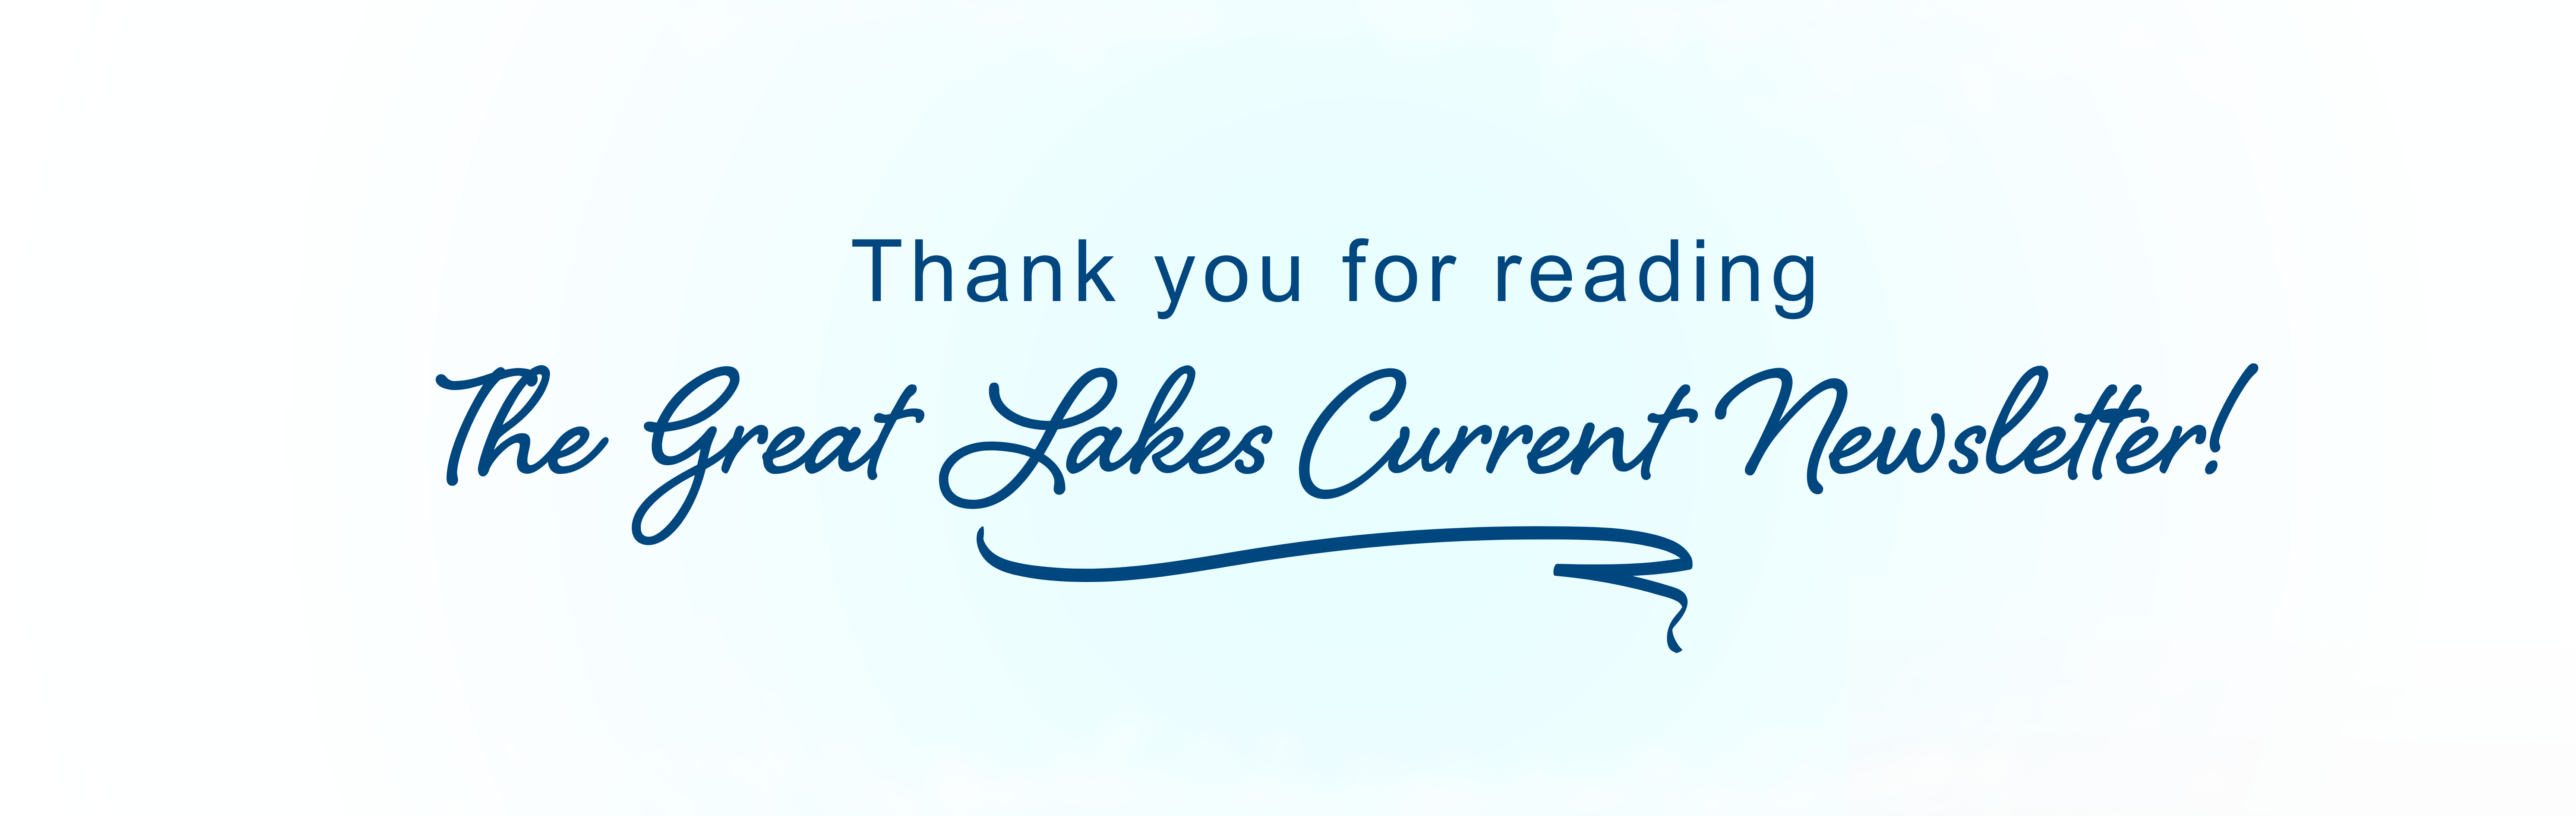 Thank you for reading The Great Lakes Current Newsletter!